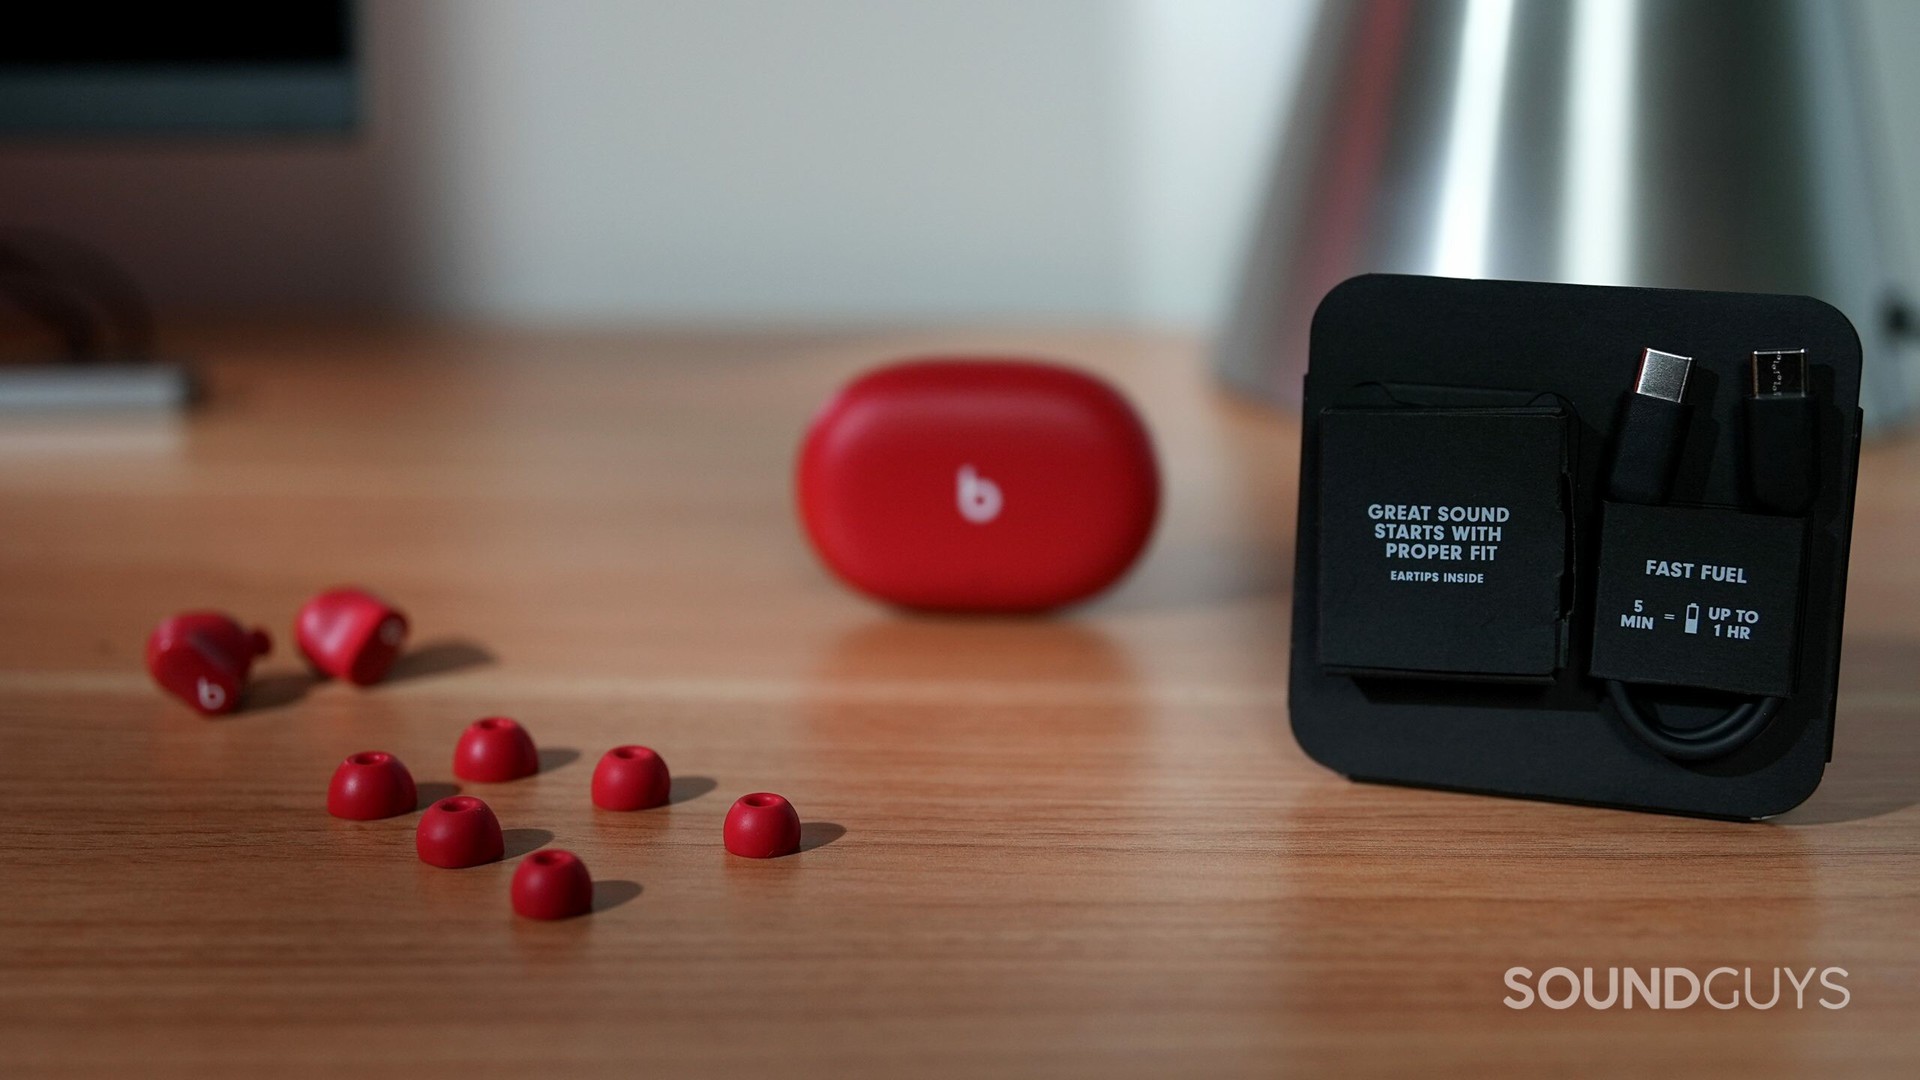 Beats Studio Buds noise cancelling true wireless earphones and the packaging.